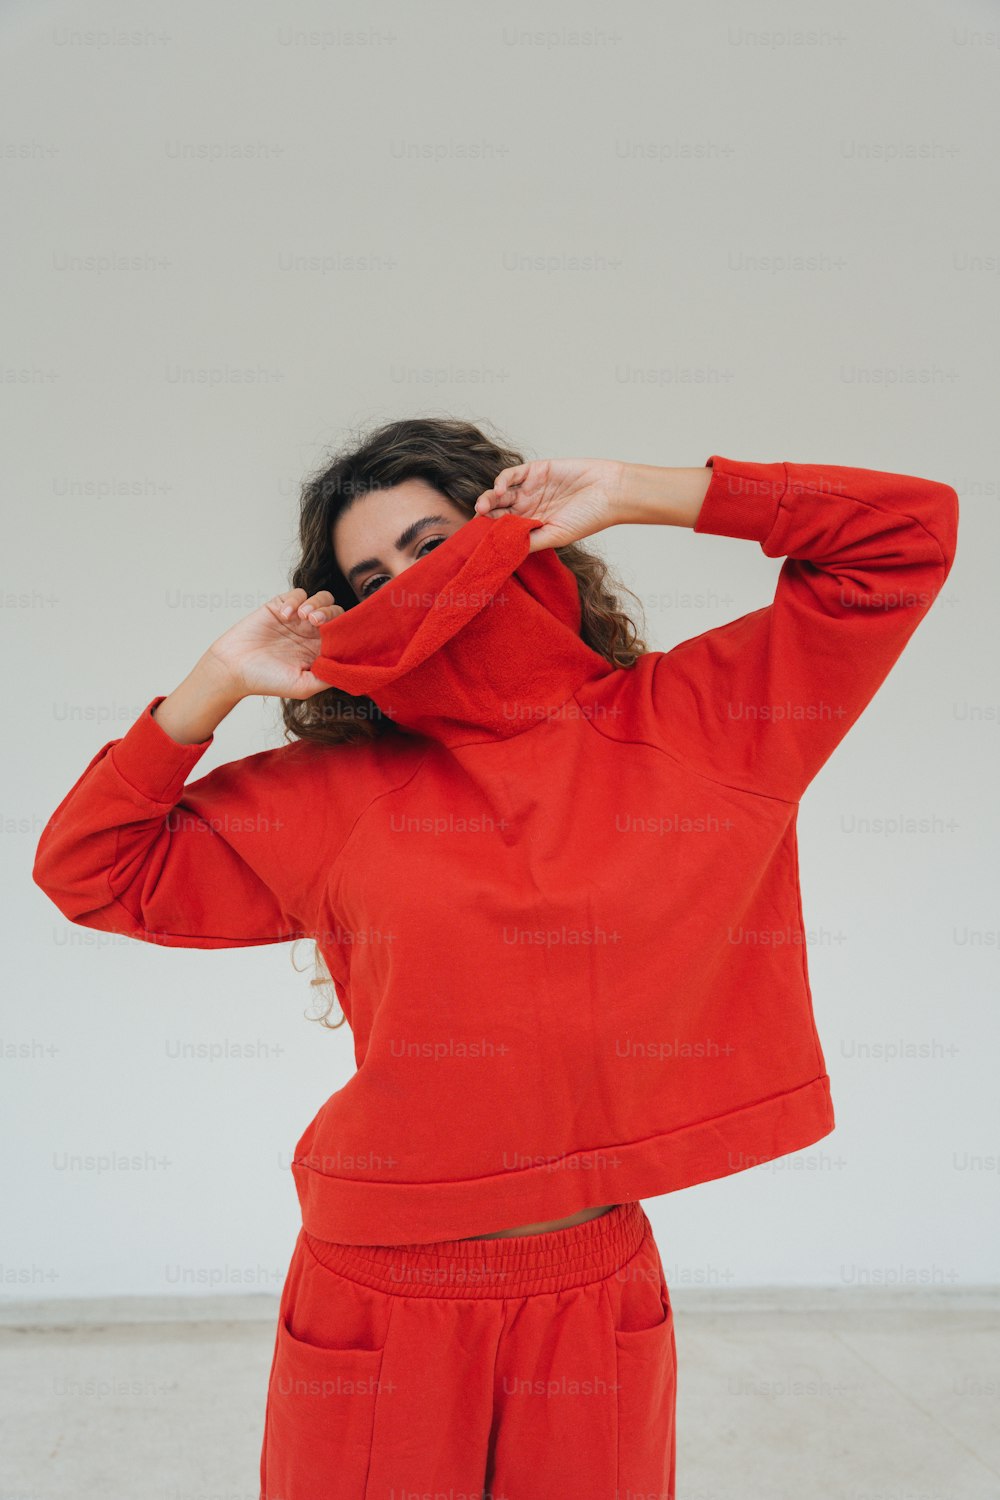 a woman in a red sweatshirt and pants